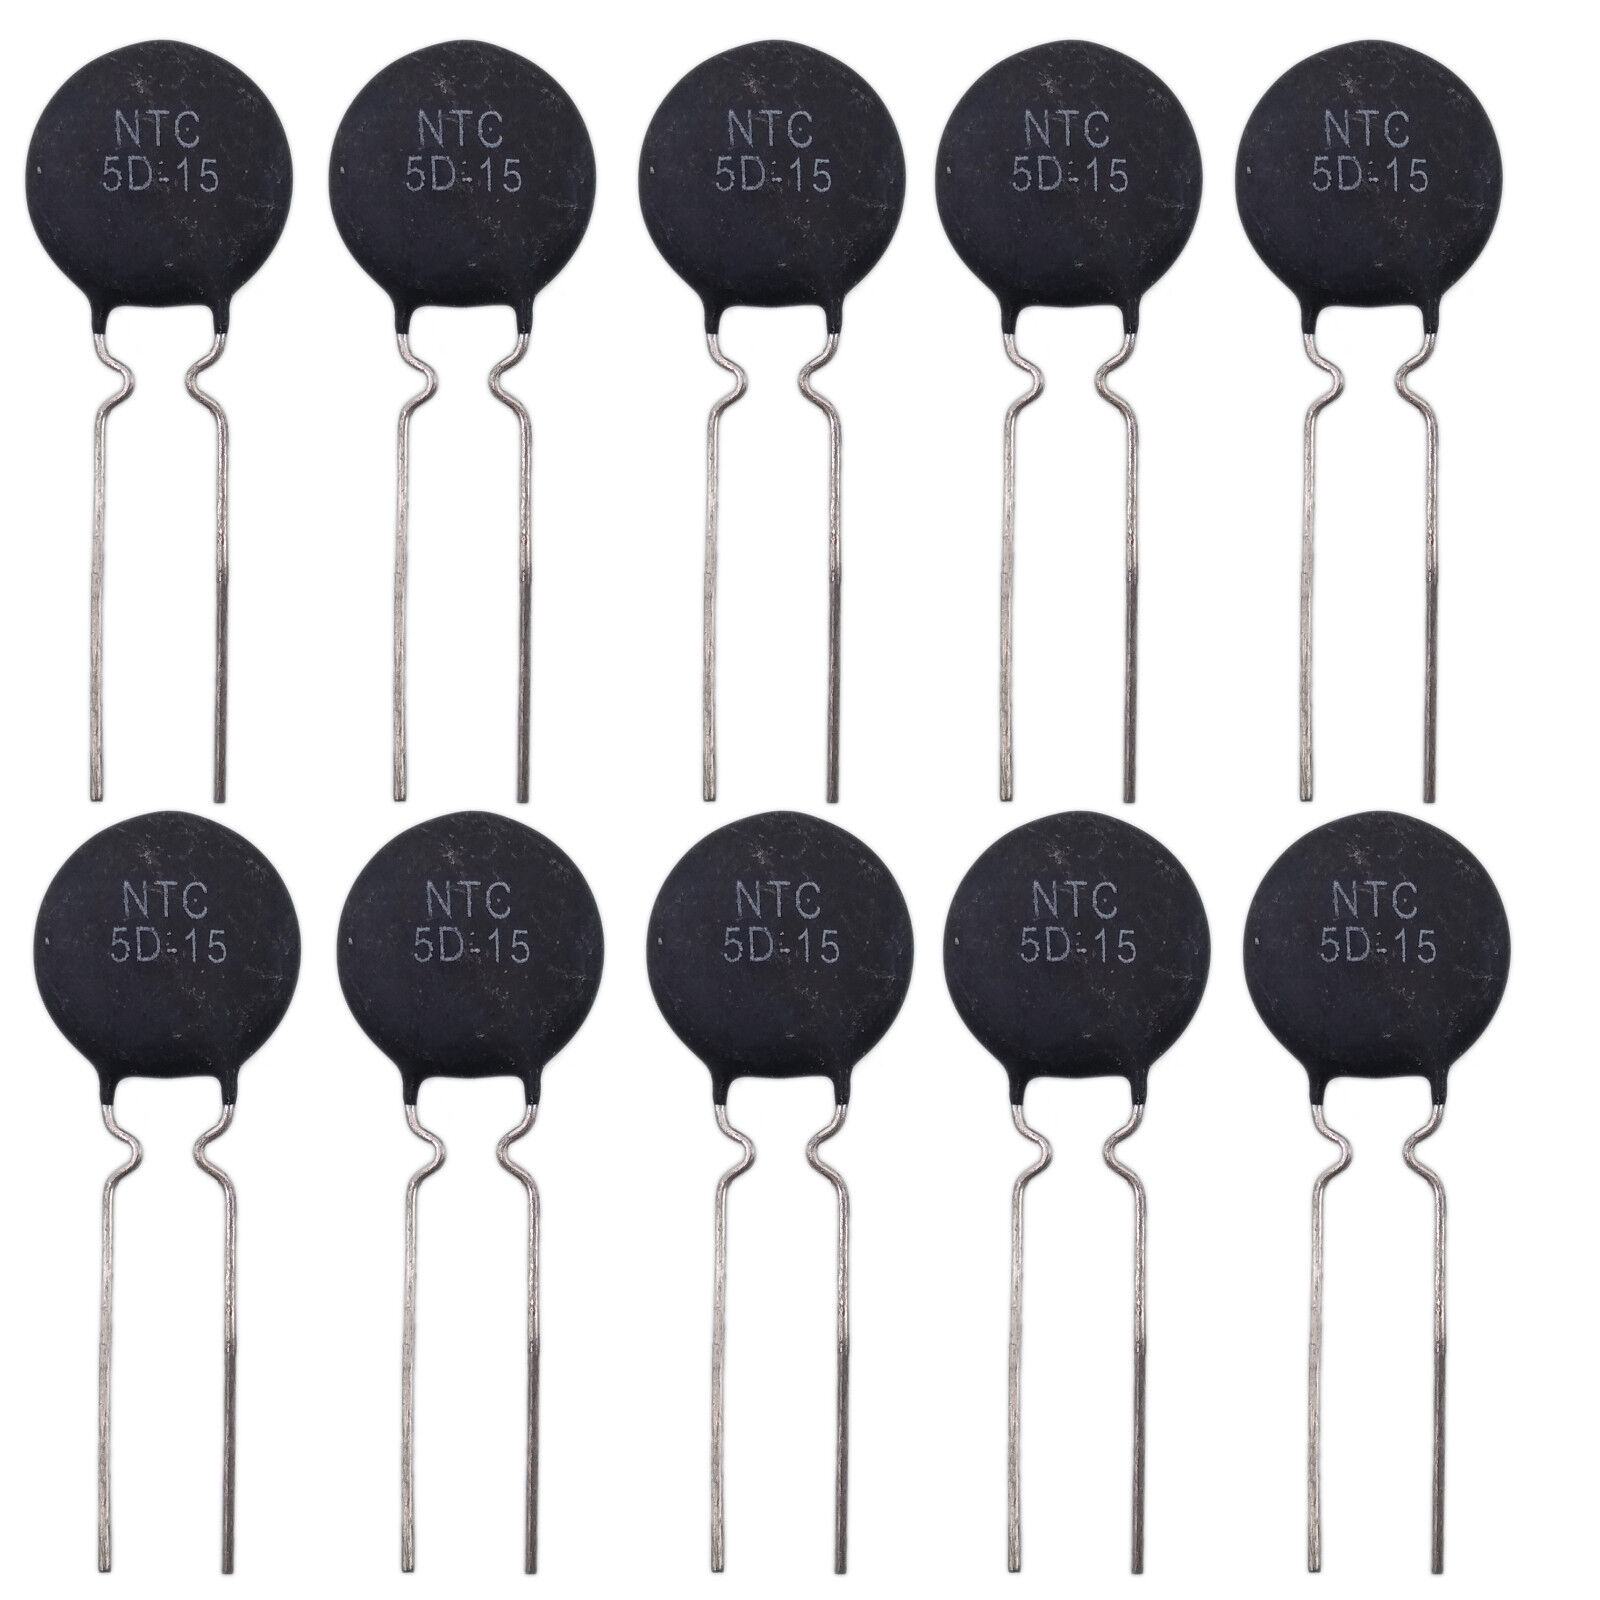 US Stock 10pcs NTC 5D-15 Thermistor Resistor In Rush Current Limiter 5 Ohms 15mm